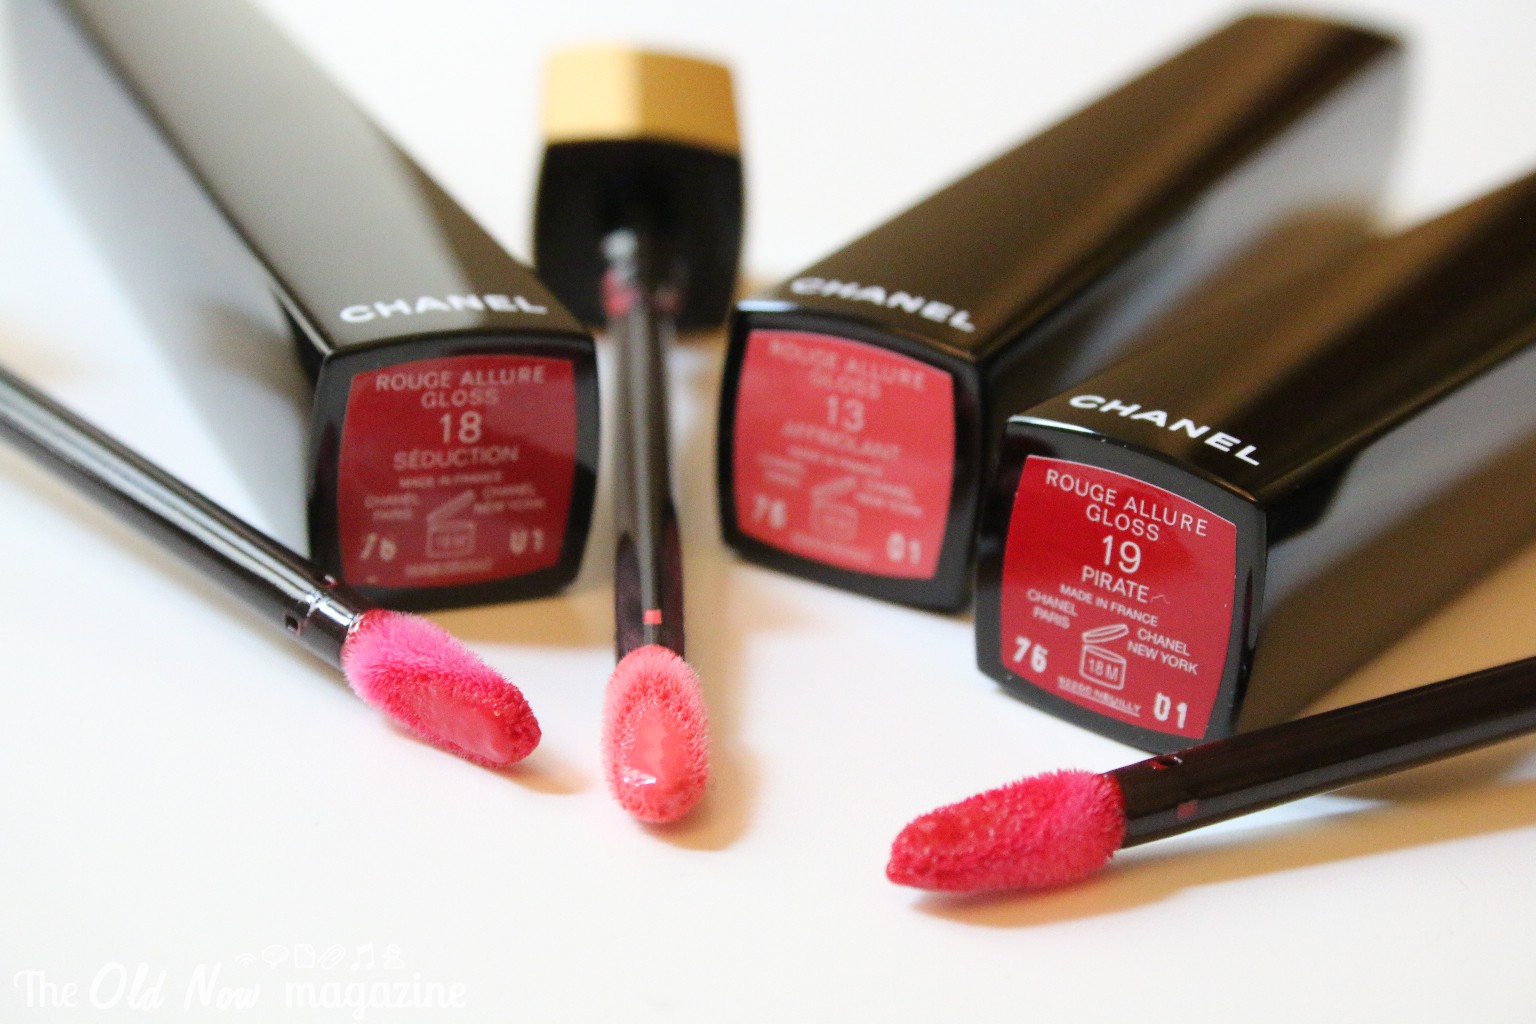 CHANEL ROUGE ALLURE GLOSS THEOLDNOW (5)